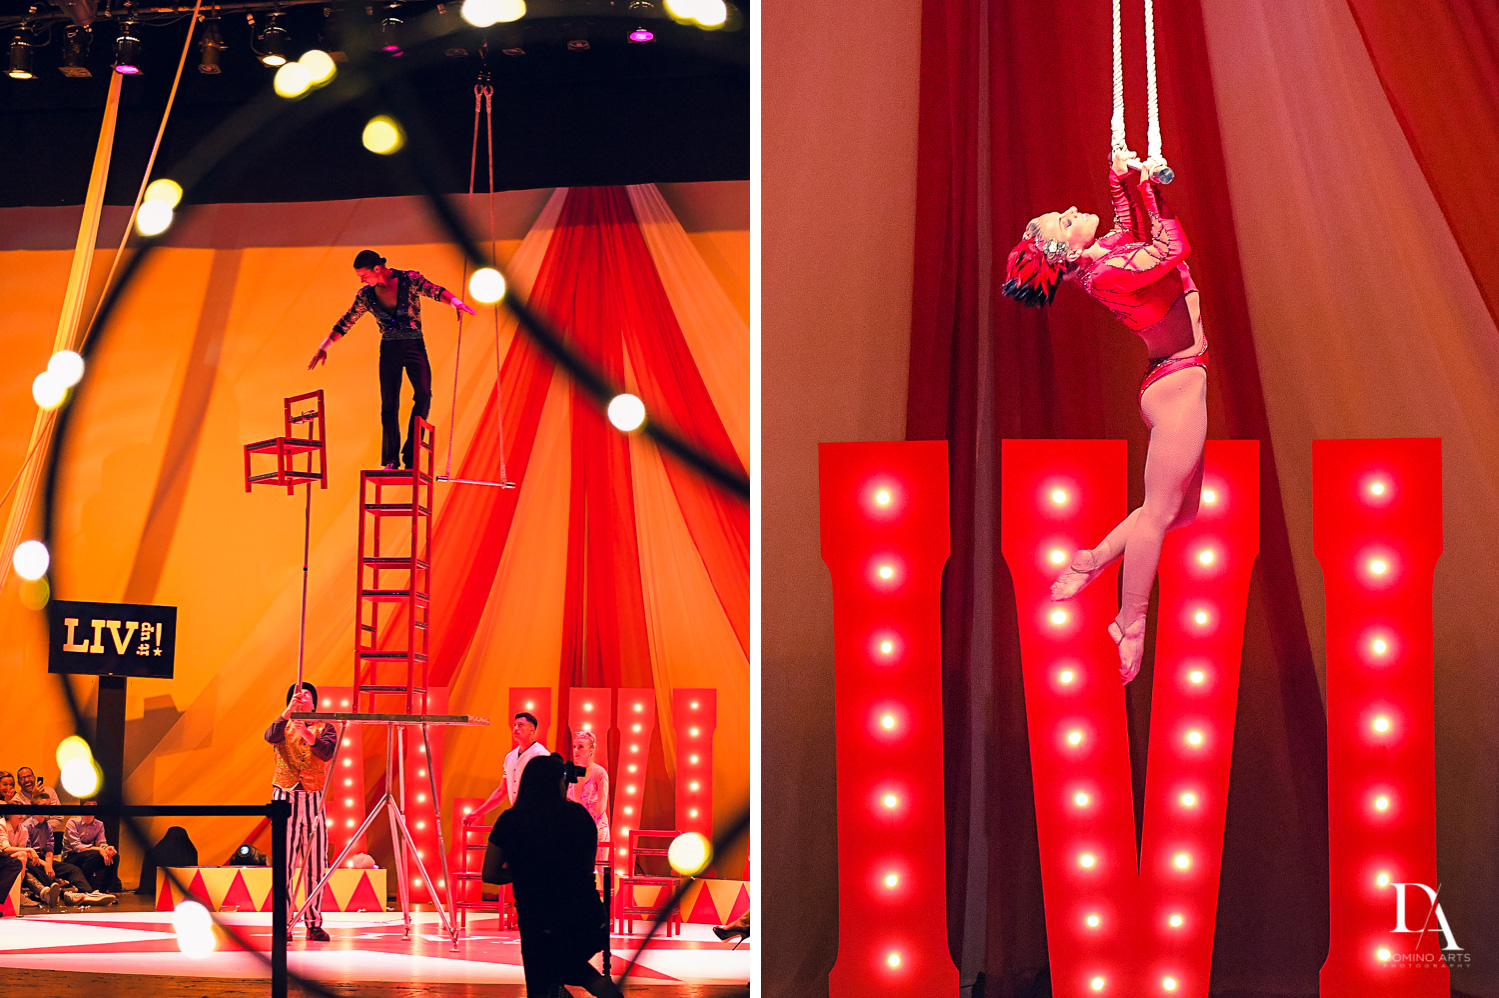 Circus show at The Greatest Showman theme Bat Mitzvah at the filmore miami by Domino Arts Photography